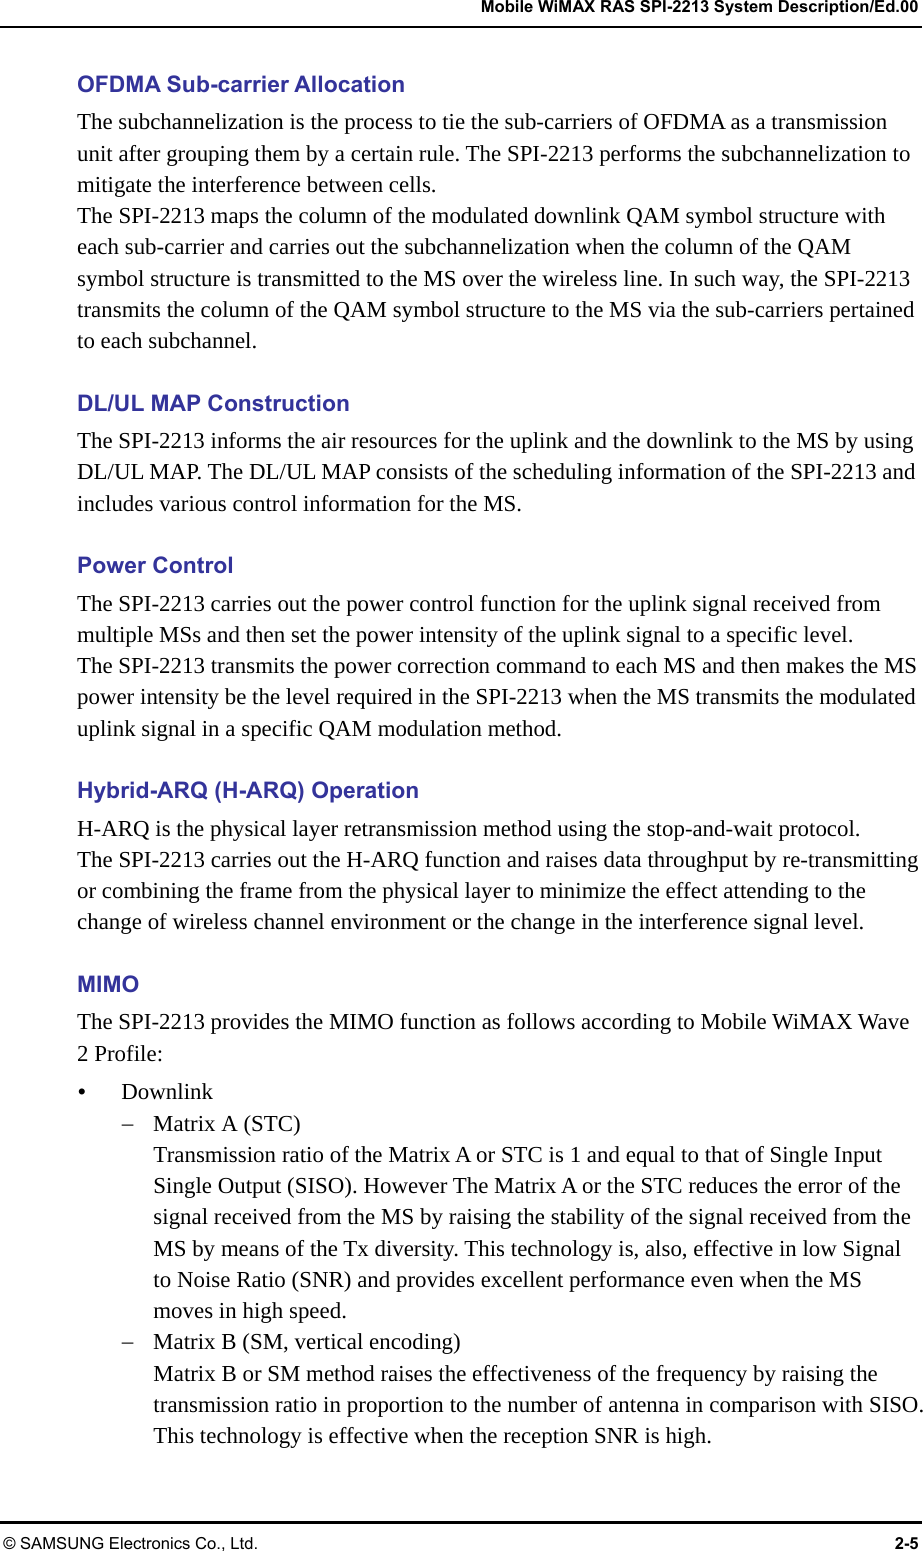   Mobile WiMAX RAS SPI-2213 System Description/Ed.00 © SAMSUNG Electronics Co., Ltd.  2-5 OFDMA Sub-carrier Allocation The subchannelization is the process to tie the sub-carriers of OFDMA as a transmission unit after grouping them by a certain rule. The SPI-2213 performs the subchannelization to mitigate the interference between cells. The SPI-2213 maps the column of the modulated downlink QAM symbol structure with each sub-carrier and carries out the subchannelization when the column of the QAM symbol structure is transmitted to the MS over the wireless line. In such way, the SPI-2213 transmits the column of the QAM symbol structure to the MS via the sub-carriers pertained to each subchannel.  DL/UL MAP Construction The SPI-2213 informs the air resources for the uplink and the downlink to the MS by using DL/UL MAP. The DL/UL MAP consists of the scheduling information of the SPI-2213 and includes various control information for the MS.  Power Control The SPI-2213 carries out the power control function for the uplink signal received from multiple MSs and then set the power intensity of the uplink signal to a specific level. The SPI-2213 transmits the power correction command to each MS and then makes the MS power intensity be the level required in the SPI-2213 when the MS transmits the modulated uplink signal in a specific QAM modulation method.  Hybrid-ARQ (H-ARQ) Operation H-ARQ is the physical layer retransmission method using the stop-and-wait protocol.   The SPI-2213 carries out the H-ARQ function and raises data throughput by re-transmitting or combining the frame from the physical layer to minimize the effect attending to the change of wireless channel environment or the change in the interference signal level.  MIMO The SPI-2213 provides the MIMO function as follows according to Mobile WiMAX Wave 2 Profile: y Downlink − Matrix A (STC) Transmission ratio of the Matrix A or STC is 1 and equal to that of Single Input Single Output (SISO). However The Matrix A or the STC reduces the error of the signal received from the MS by raising the stability of the signal received from the MS by means of the Tx diversity. This technology is, also, effective in low Signal to Noise Ratio (SNR) and provides excellent performance even when the MS moves in high speed. − Matrix B (SM, vertical encoding) Matrix B or SM method raises the effectiveness of the frequency by raising the transmission ratio in proportion to the number of antenna in comparison with SISO. This technology is effective when the reception SNR is high.  